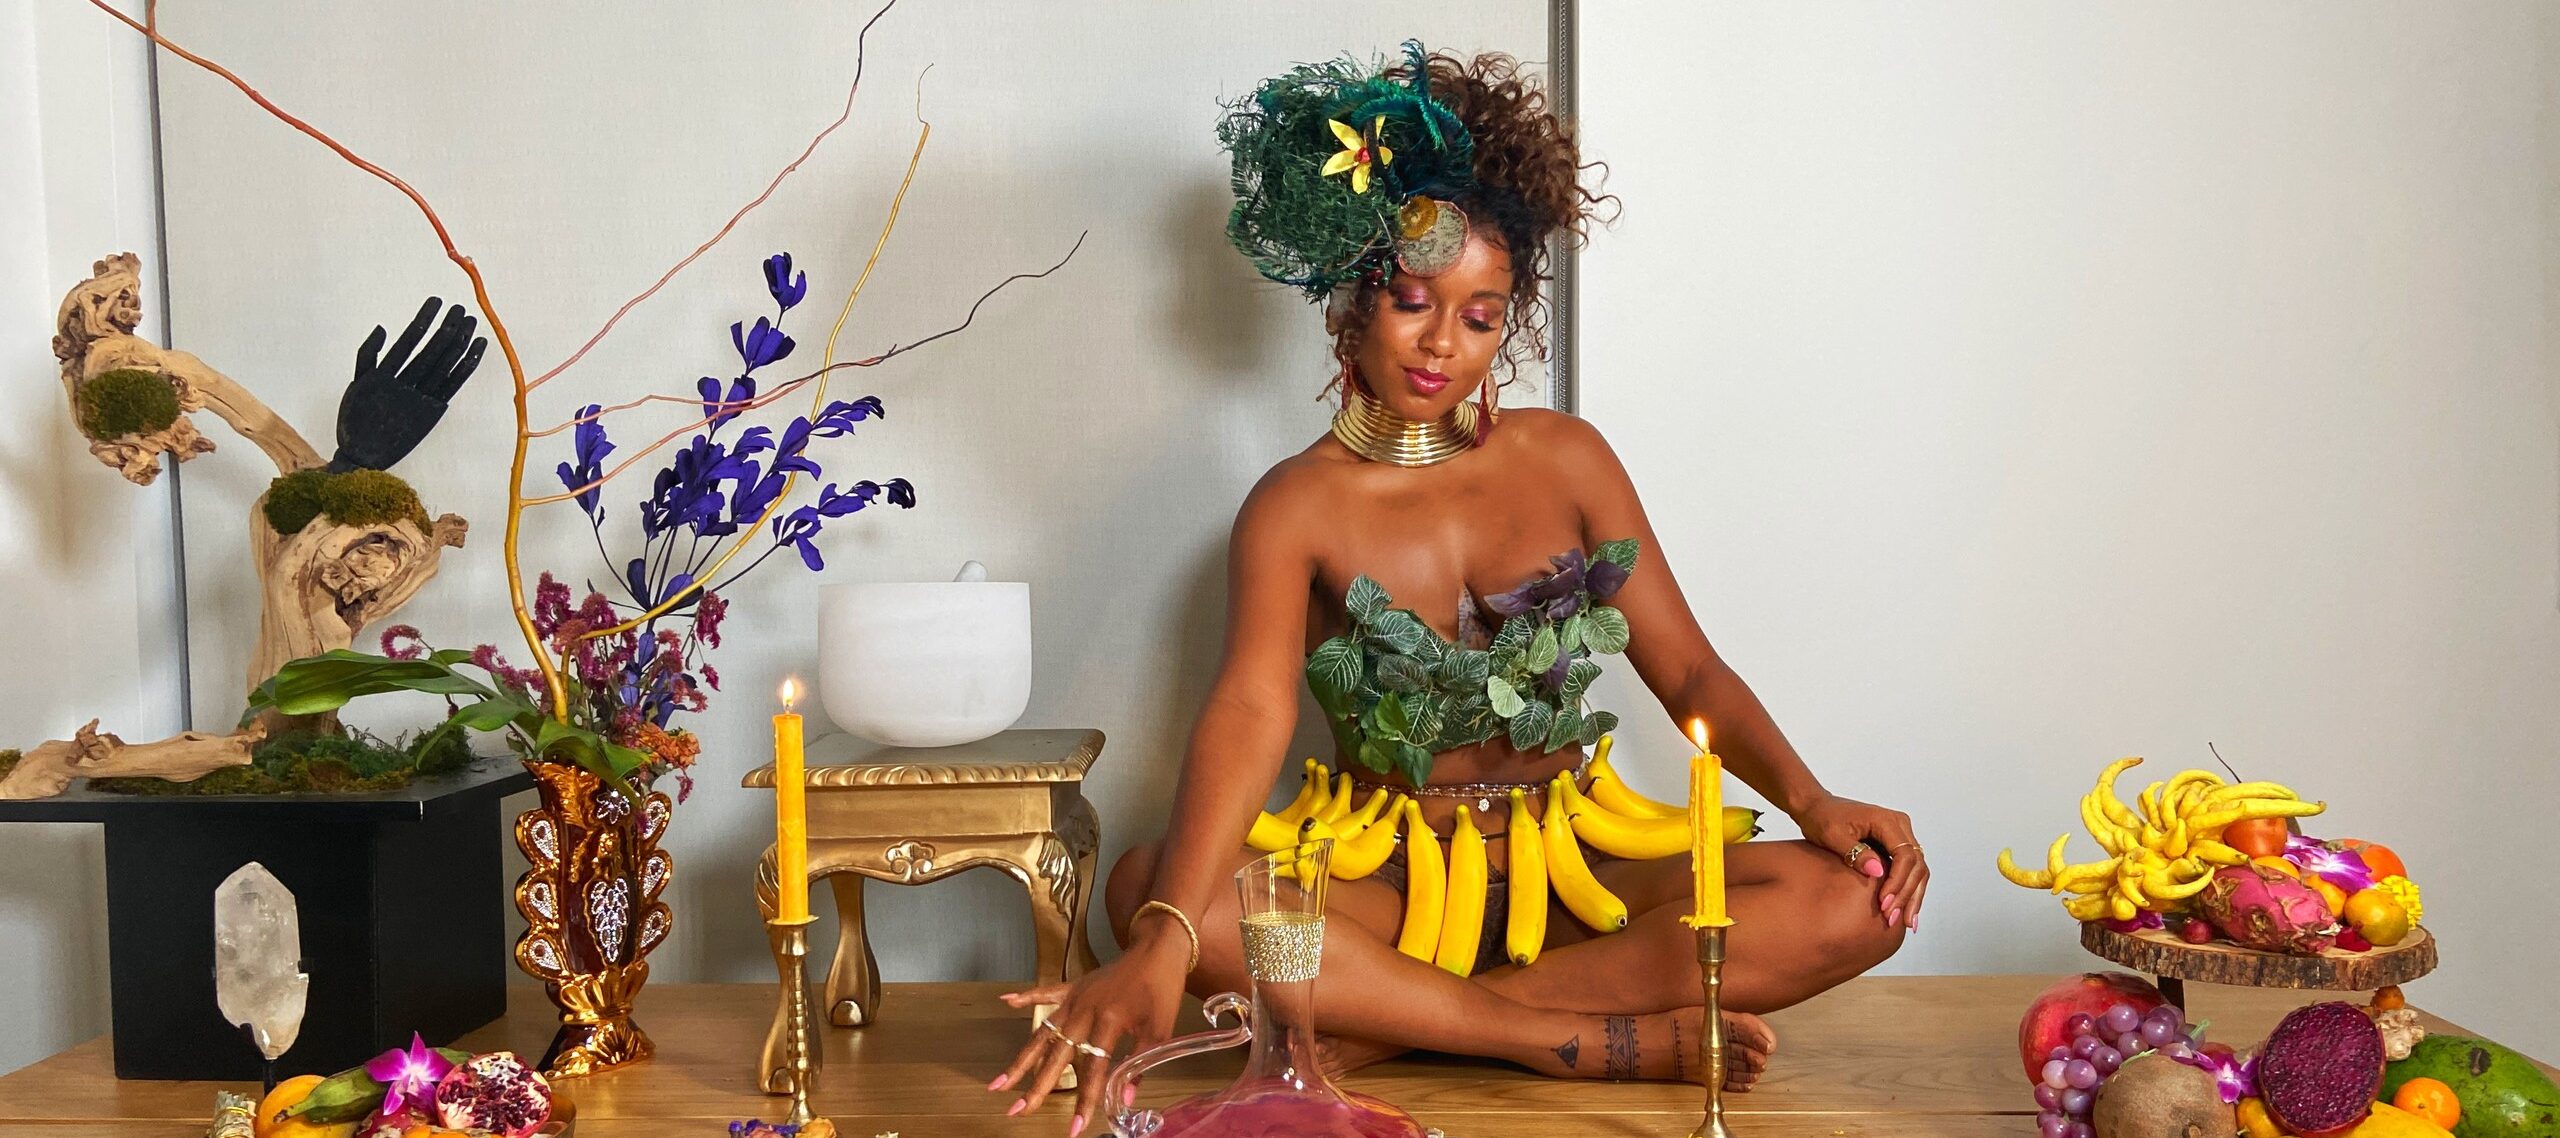 A medium-dark skinned adult woman sits cross-legged on a long wooden table set with platters of colorful fruit, candles, plants, and a pitcher of a pink liquid. She wears green leaves on her chest, gold jewelry, a skirt of bananas, and her hair pulled up with green feathers.